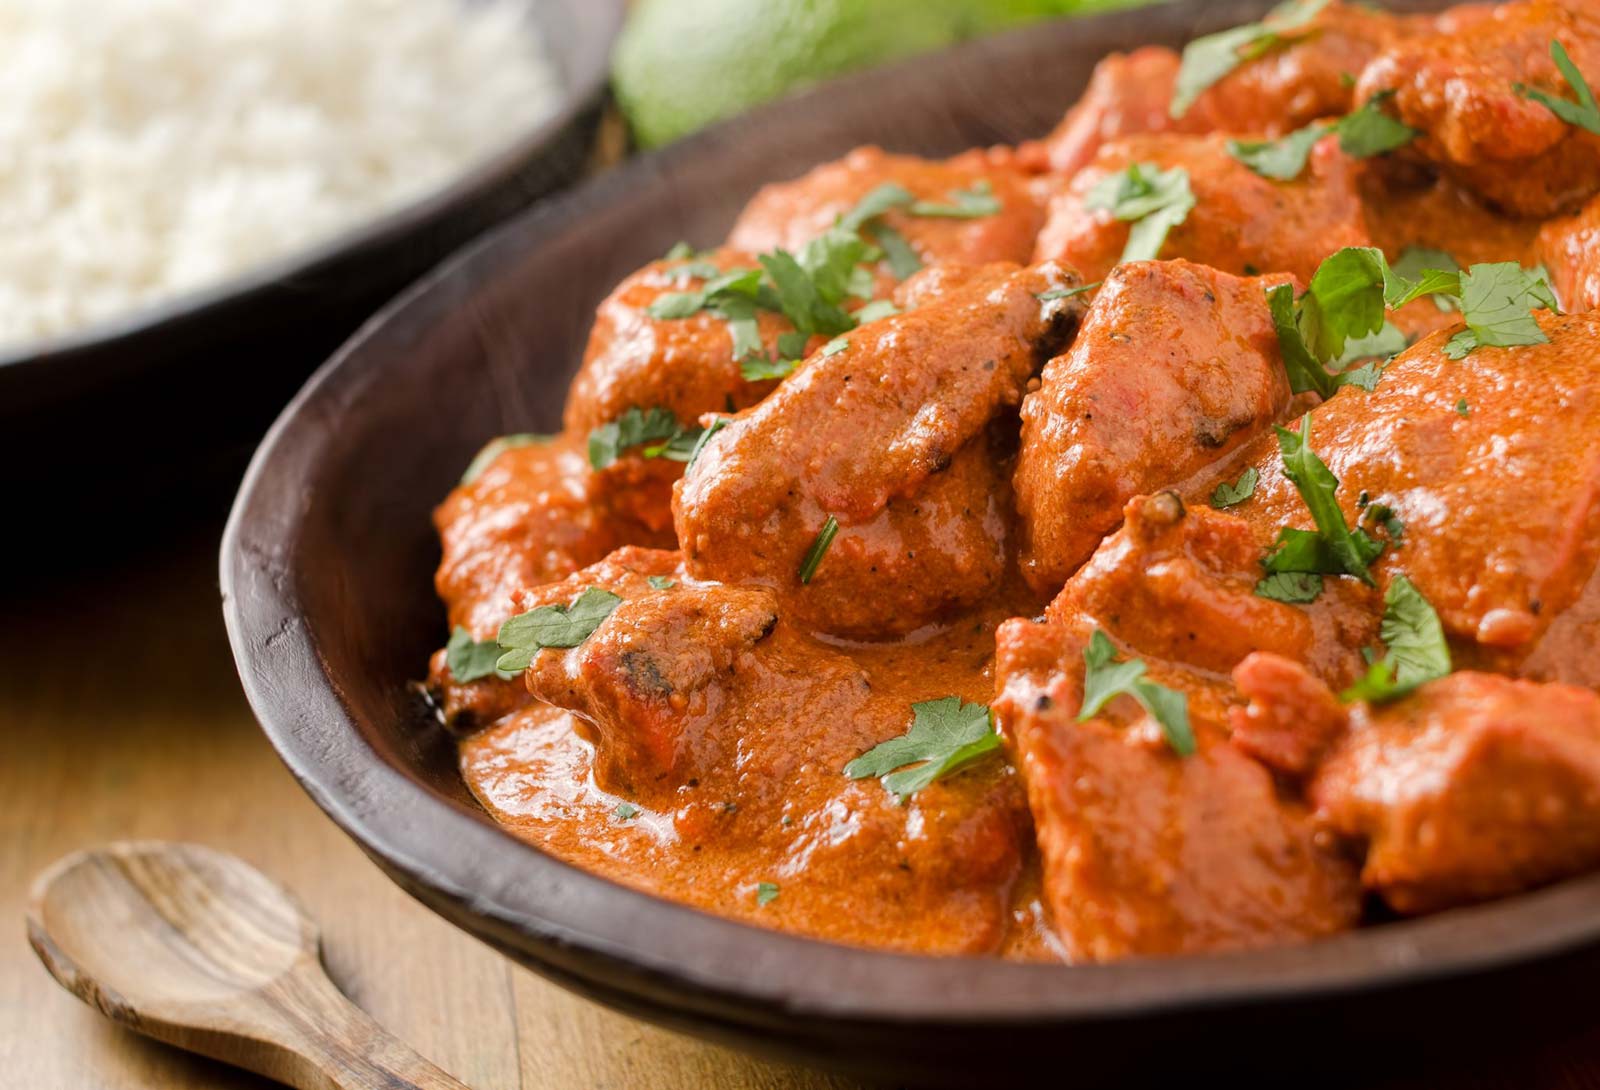 🍖 Can We Guess Your Age and Gender Based on the Meats You’ve Eaten? Butter Chicken1